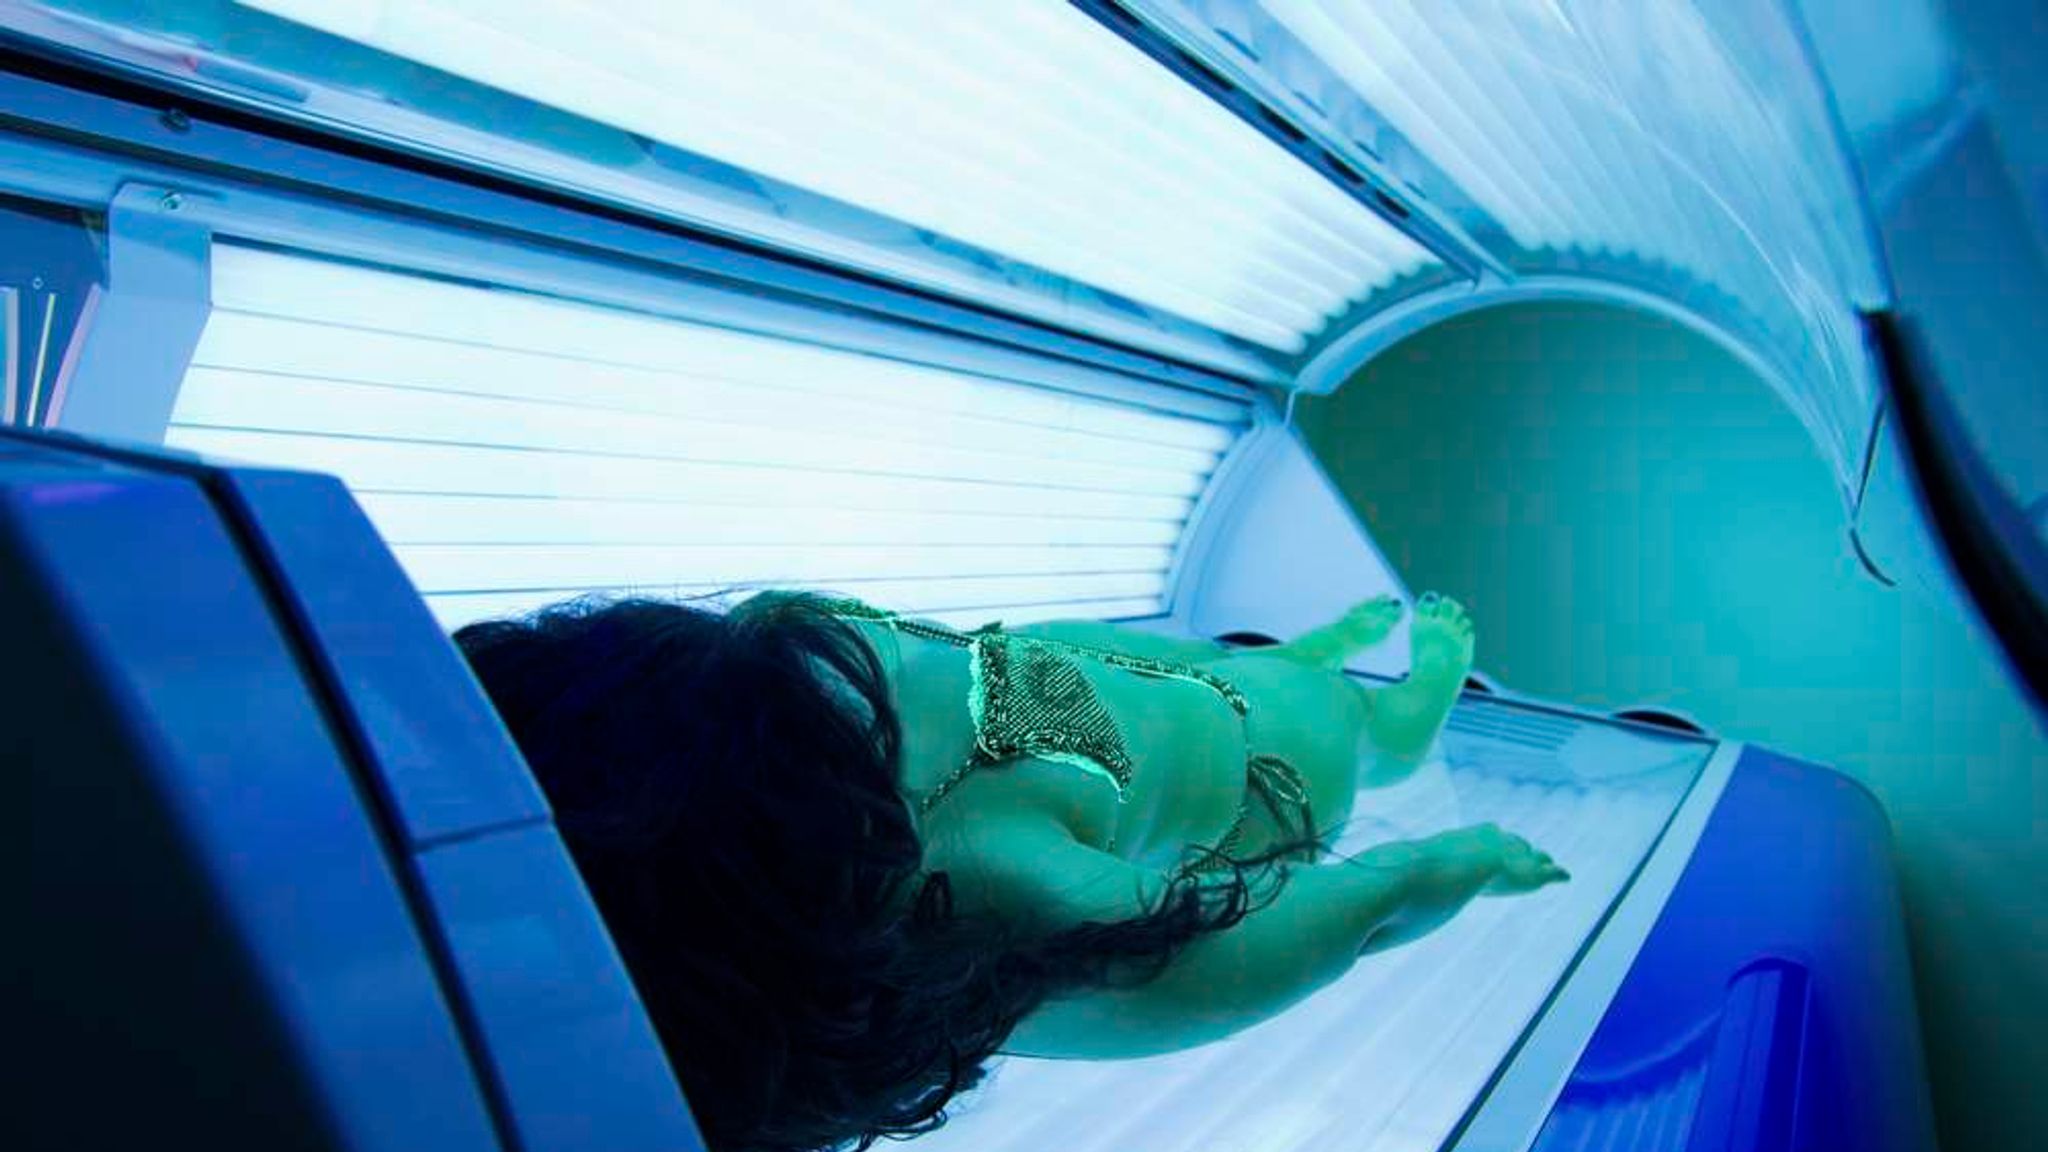 Liverpool Fashion Week Bans Sunbed Tan, Weight Limit On Lay Down Tanning Beds